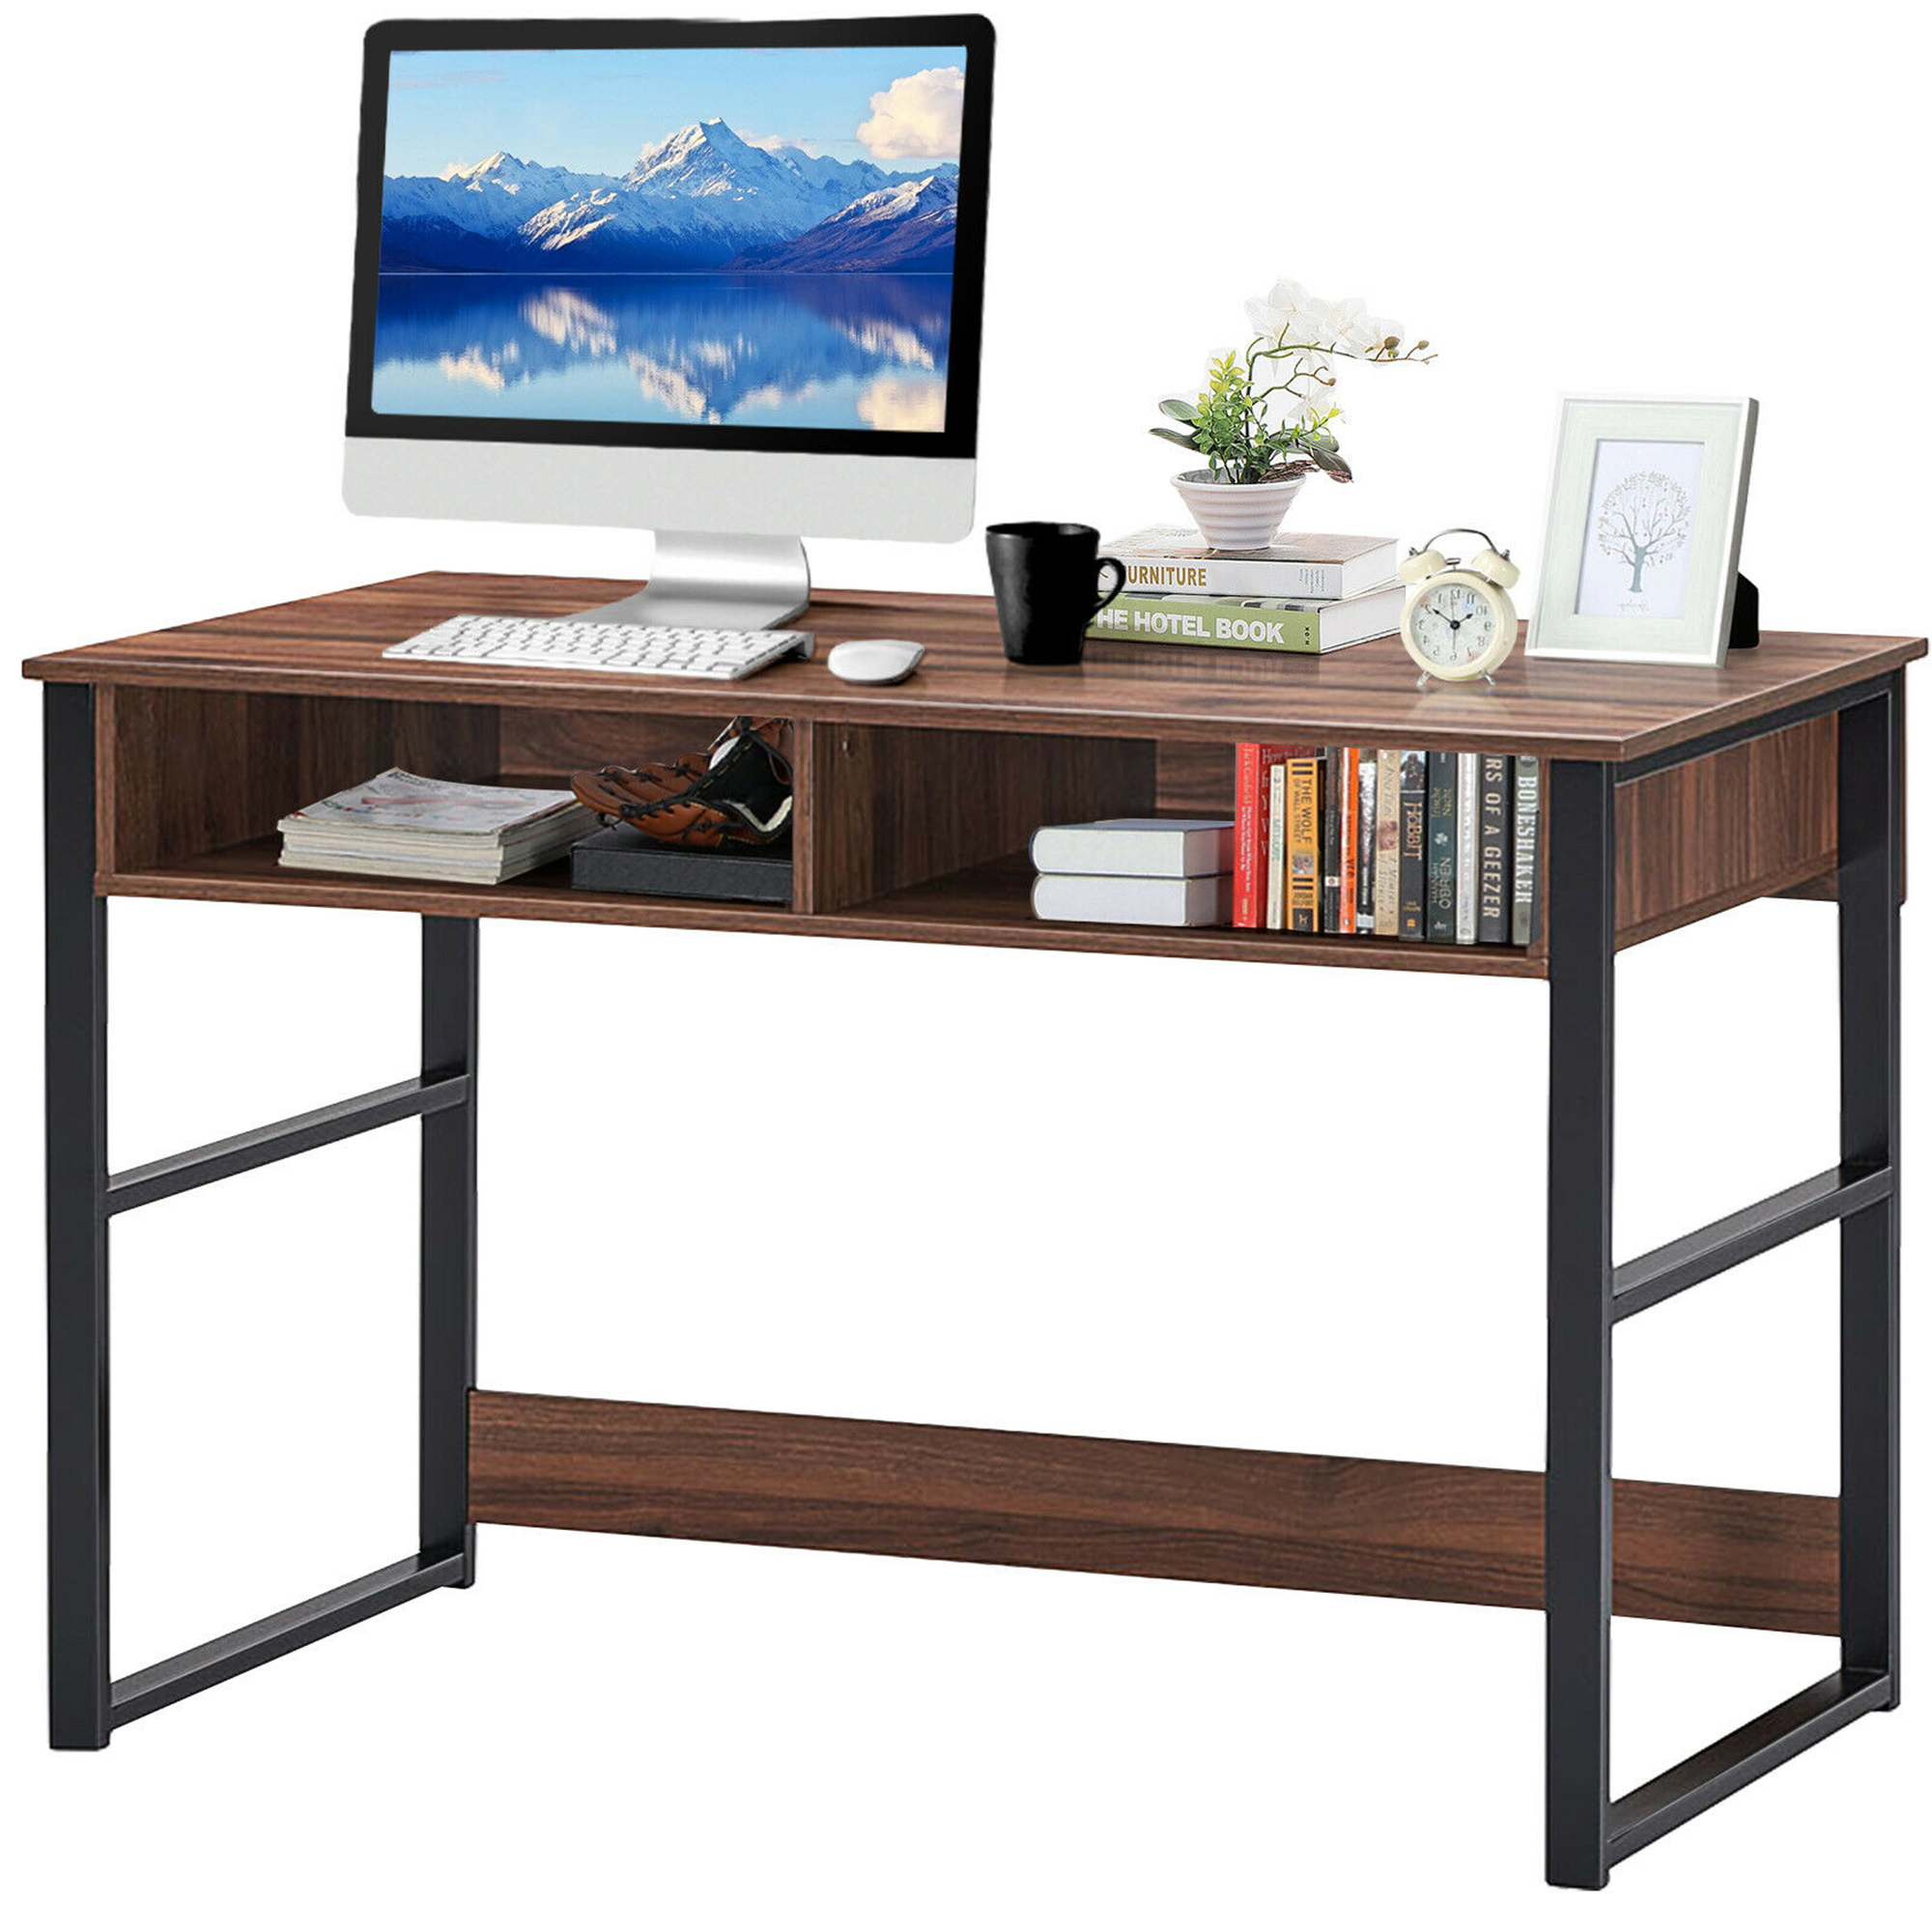 Gymax Home Office Computer Desk 2 Drawers Makeup Vanity Console Table Vintage